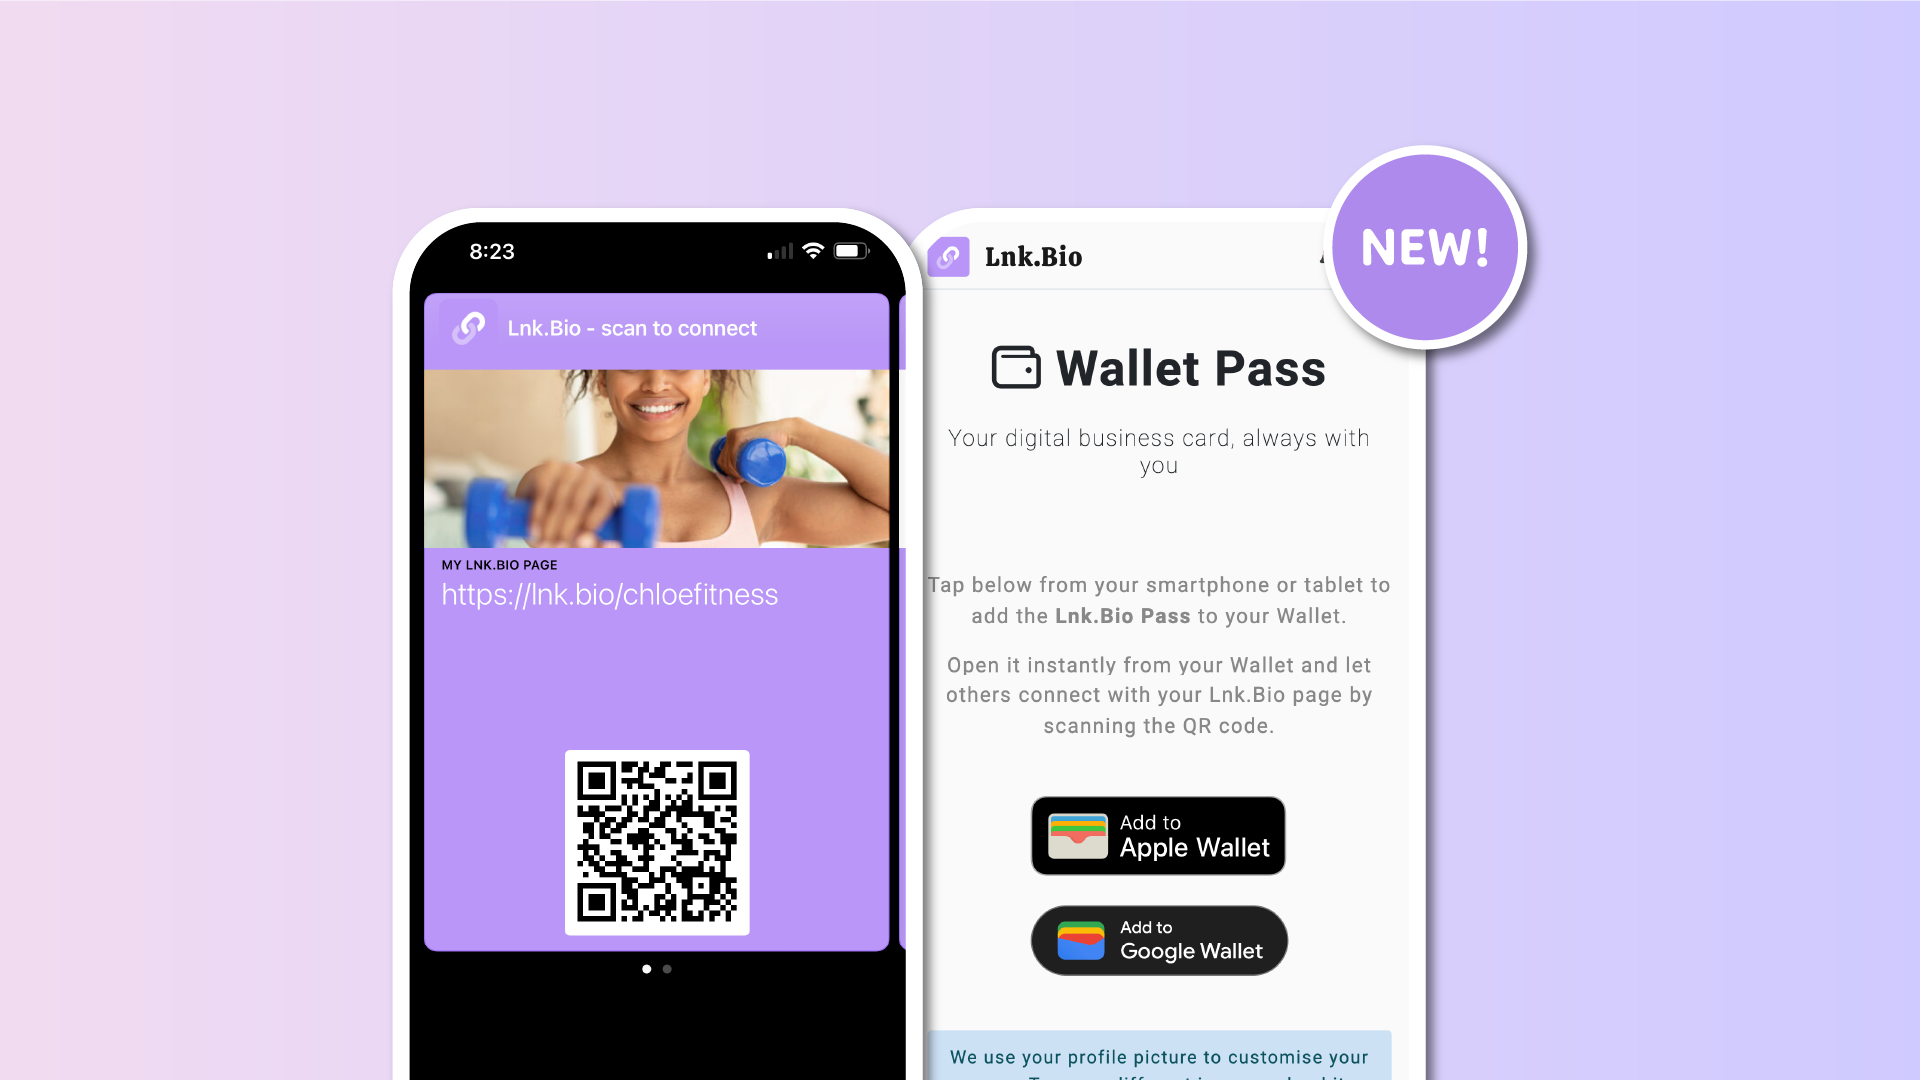 Add Lnk.Bio to your Apple Wallet or Google Wallet